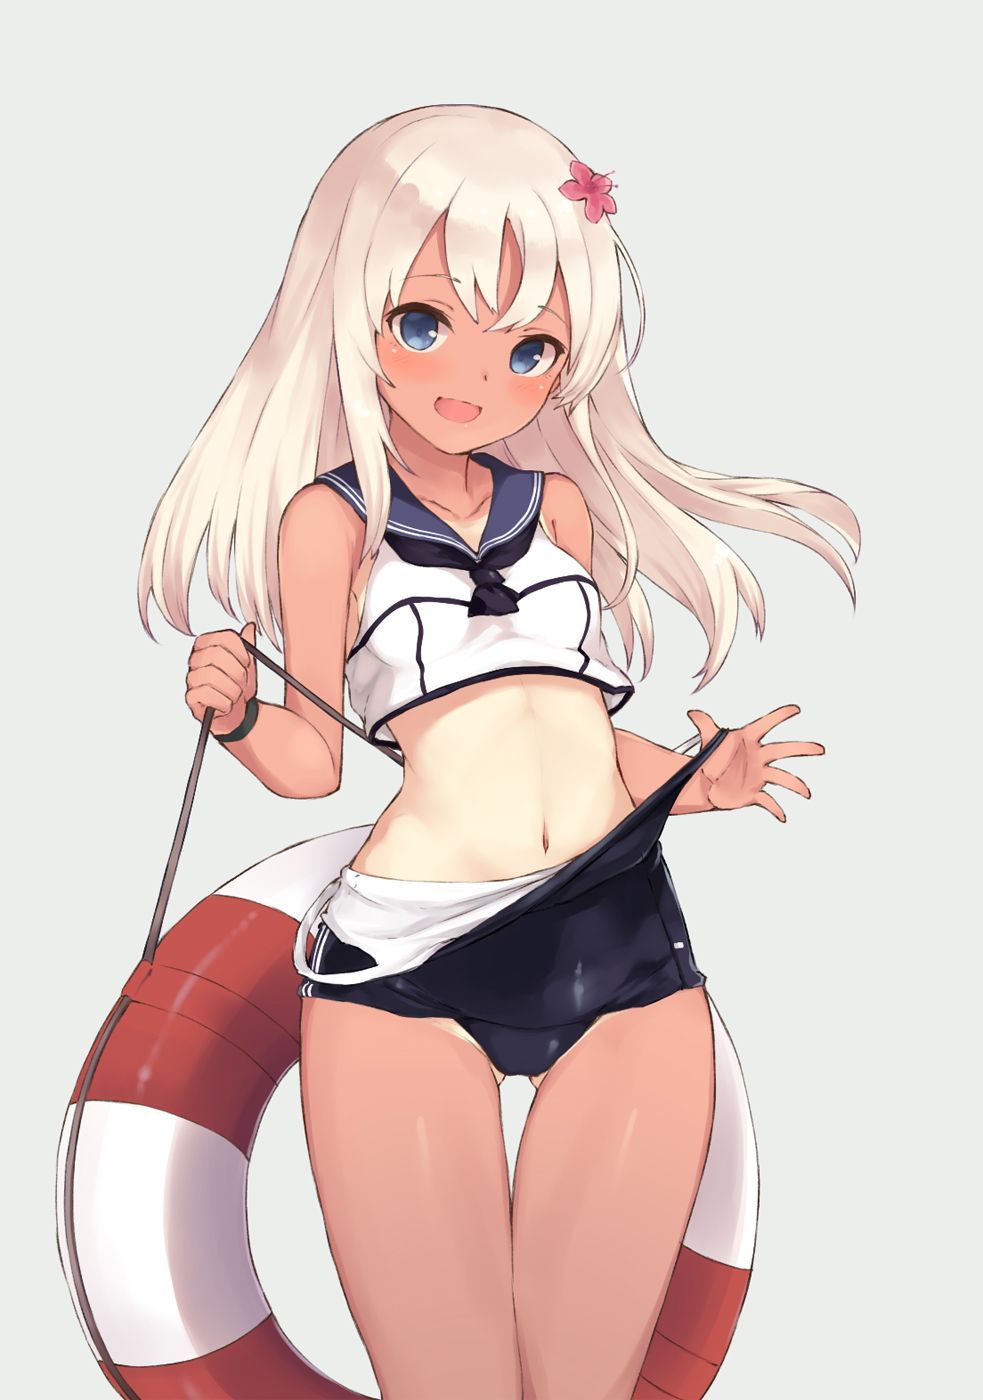 [the second] The SUQQU water sunburn daughter of warship this (fleet これくしょん), ロリエロ image summary of 呂 500, also known as the low No. 13 [20 pieces]! 17